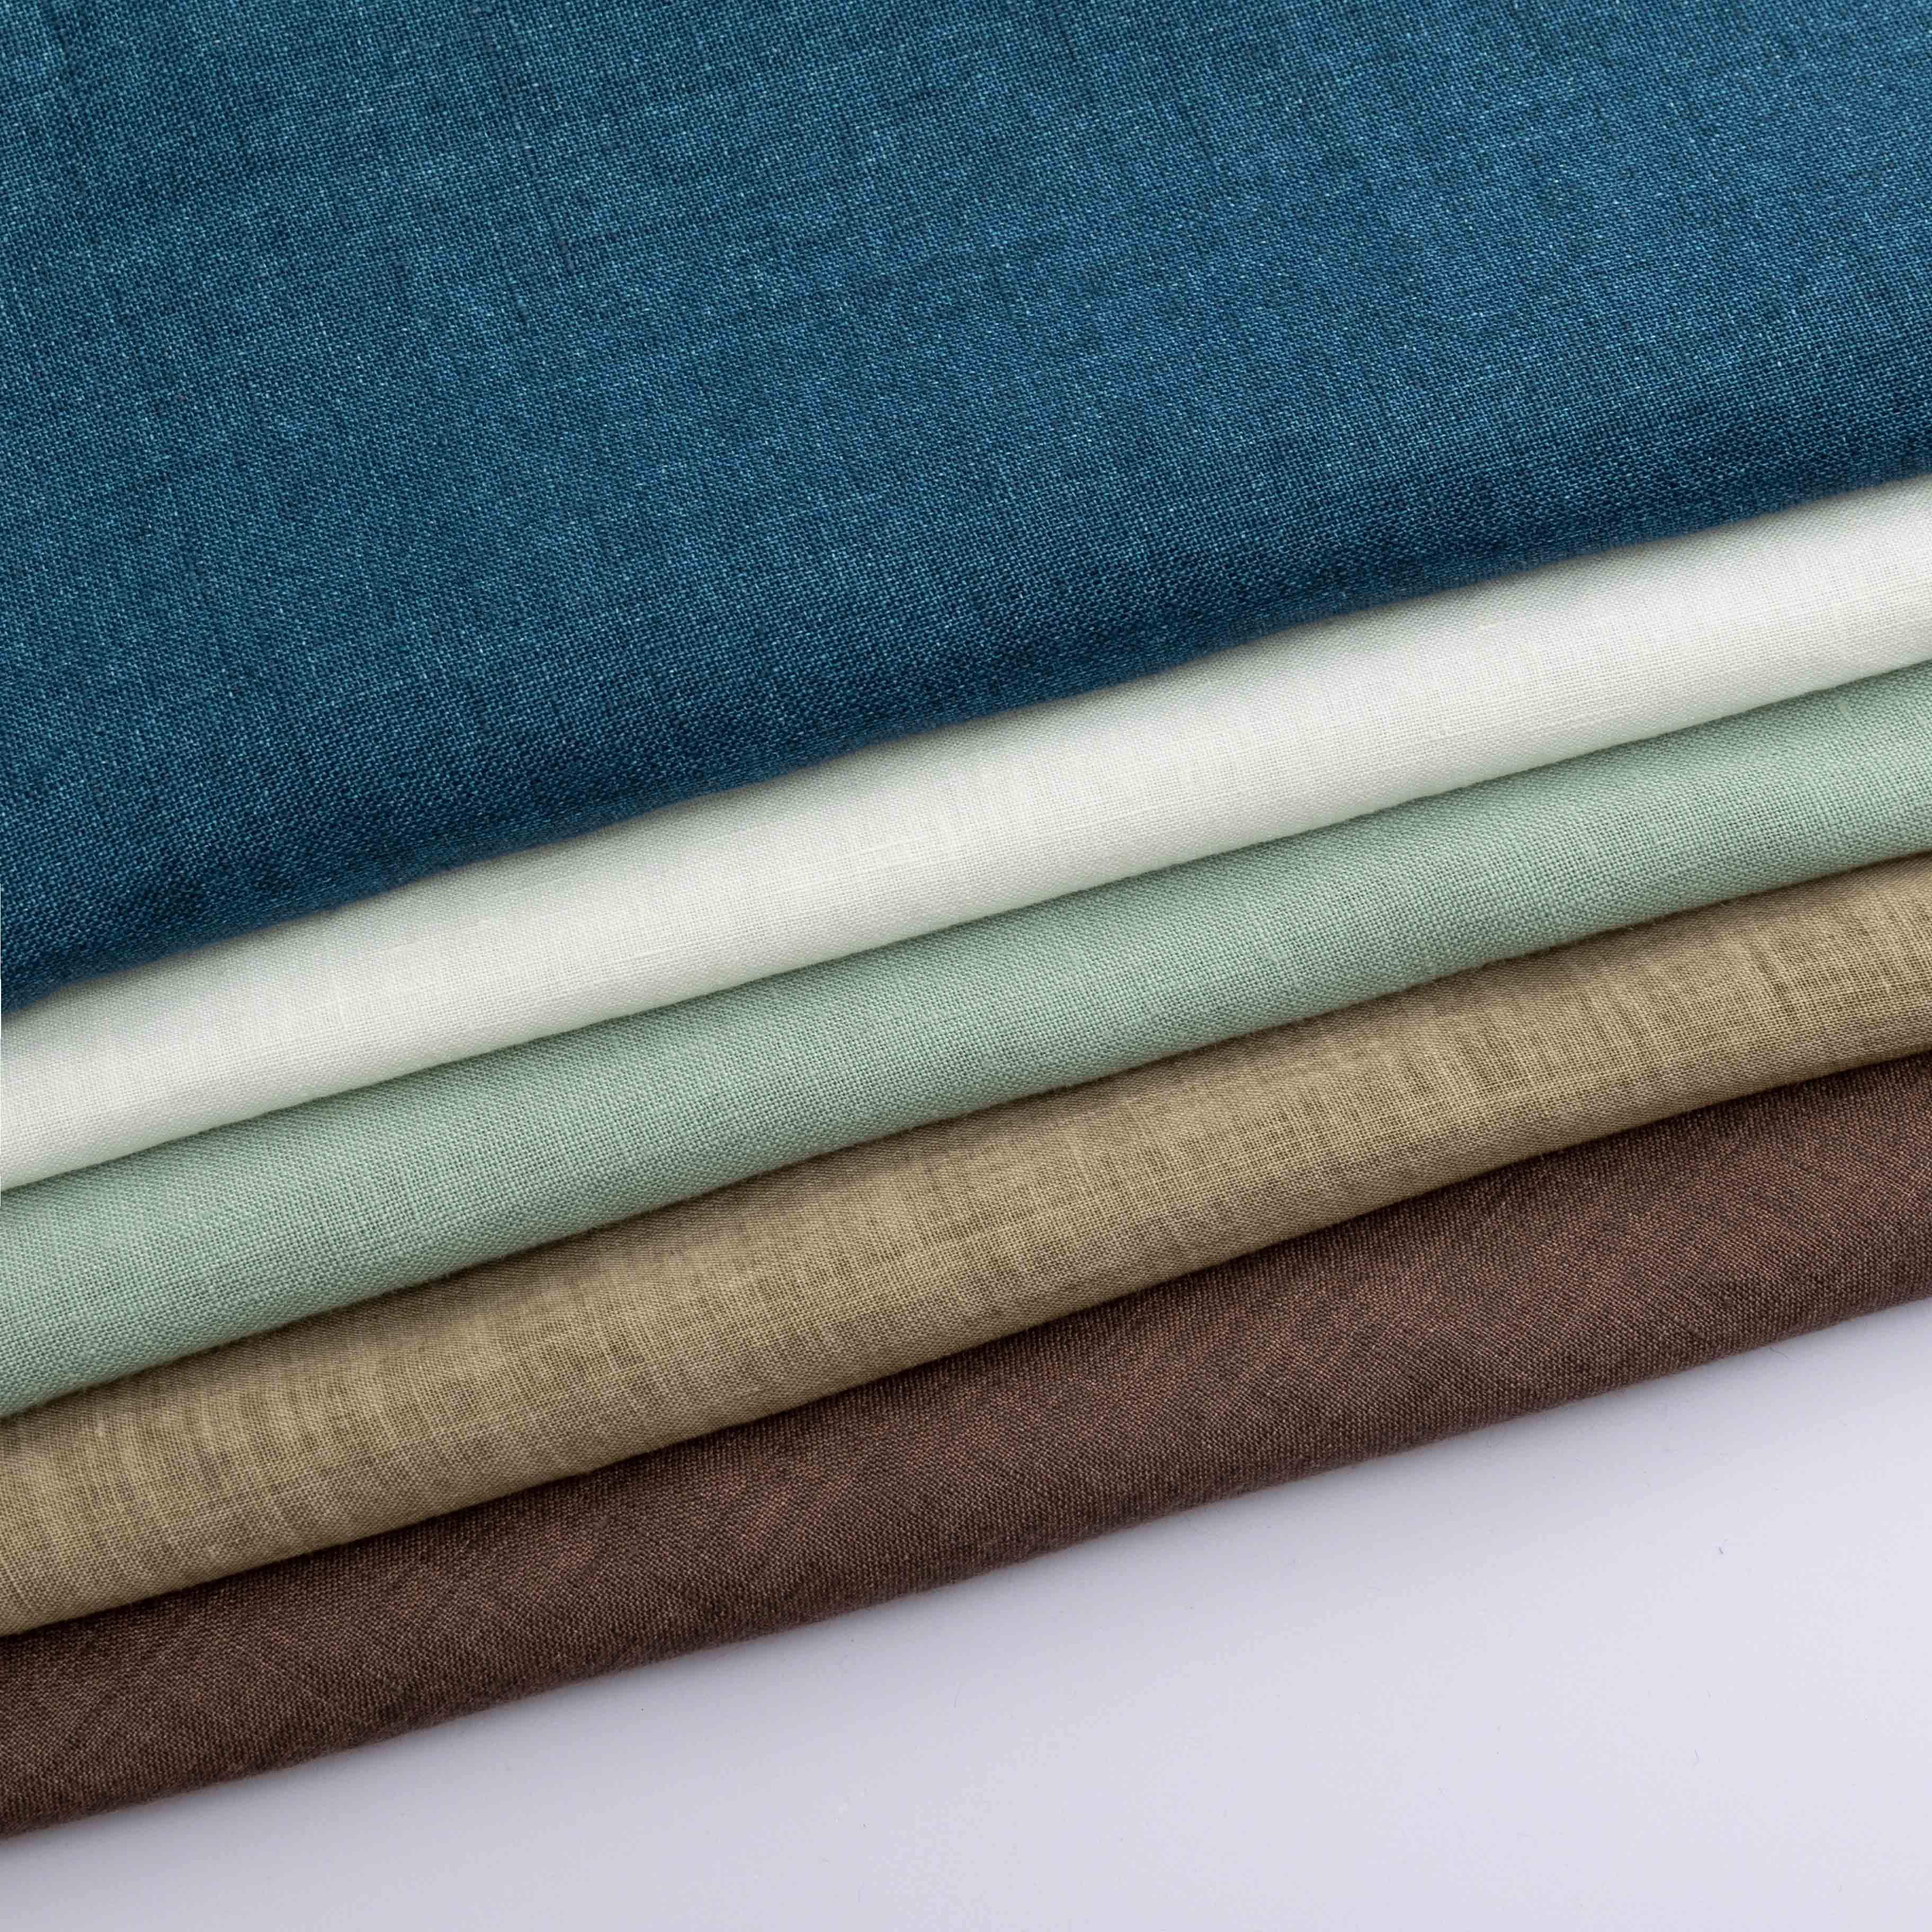 Free Sample Pure 100% linen natural stripe dyed fabric for dress